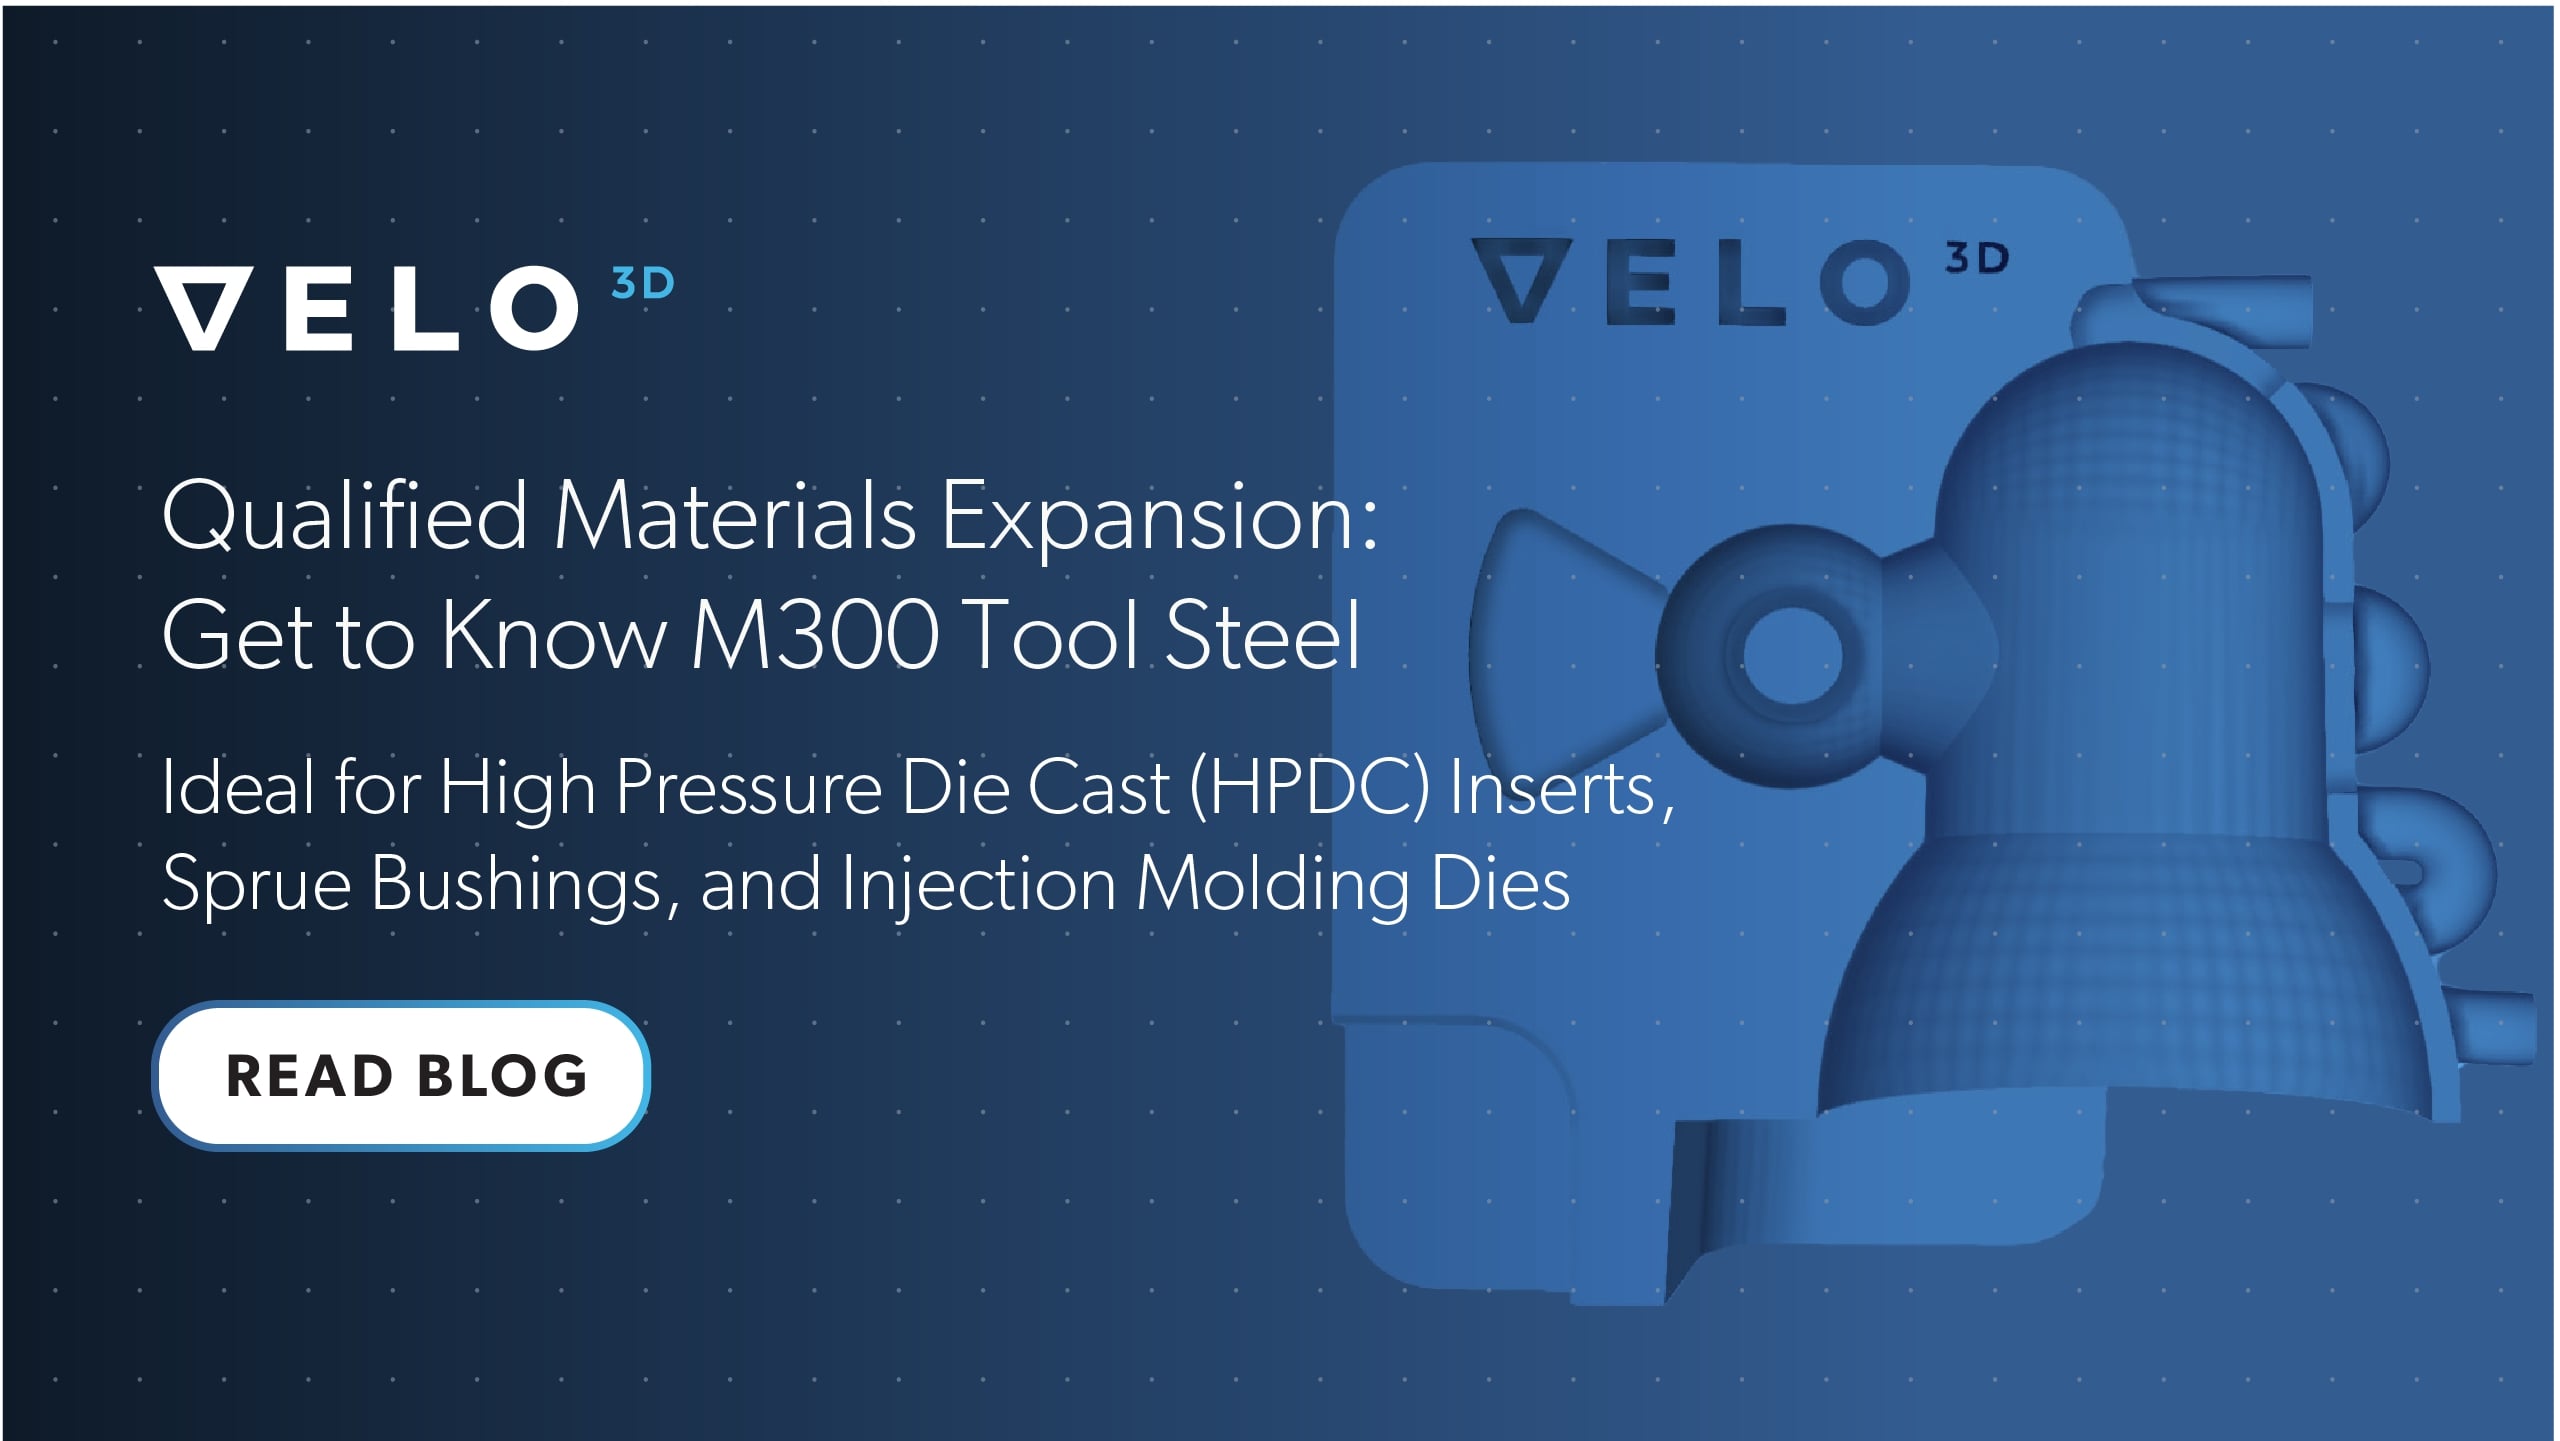 Qualified Materials Expansion: Get to Know M300 Tool Steel